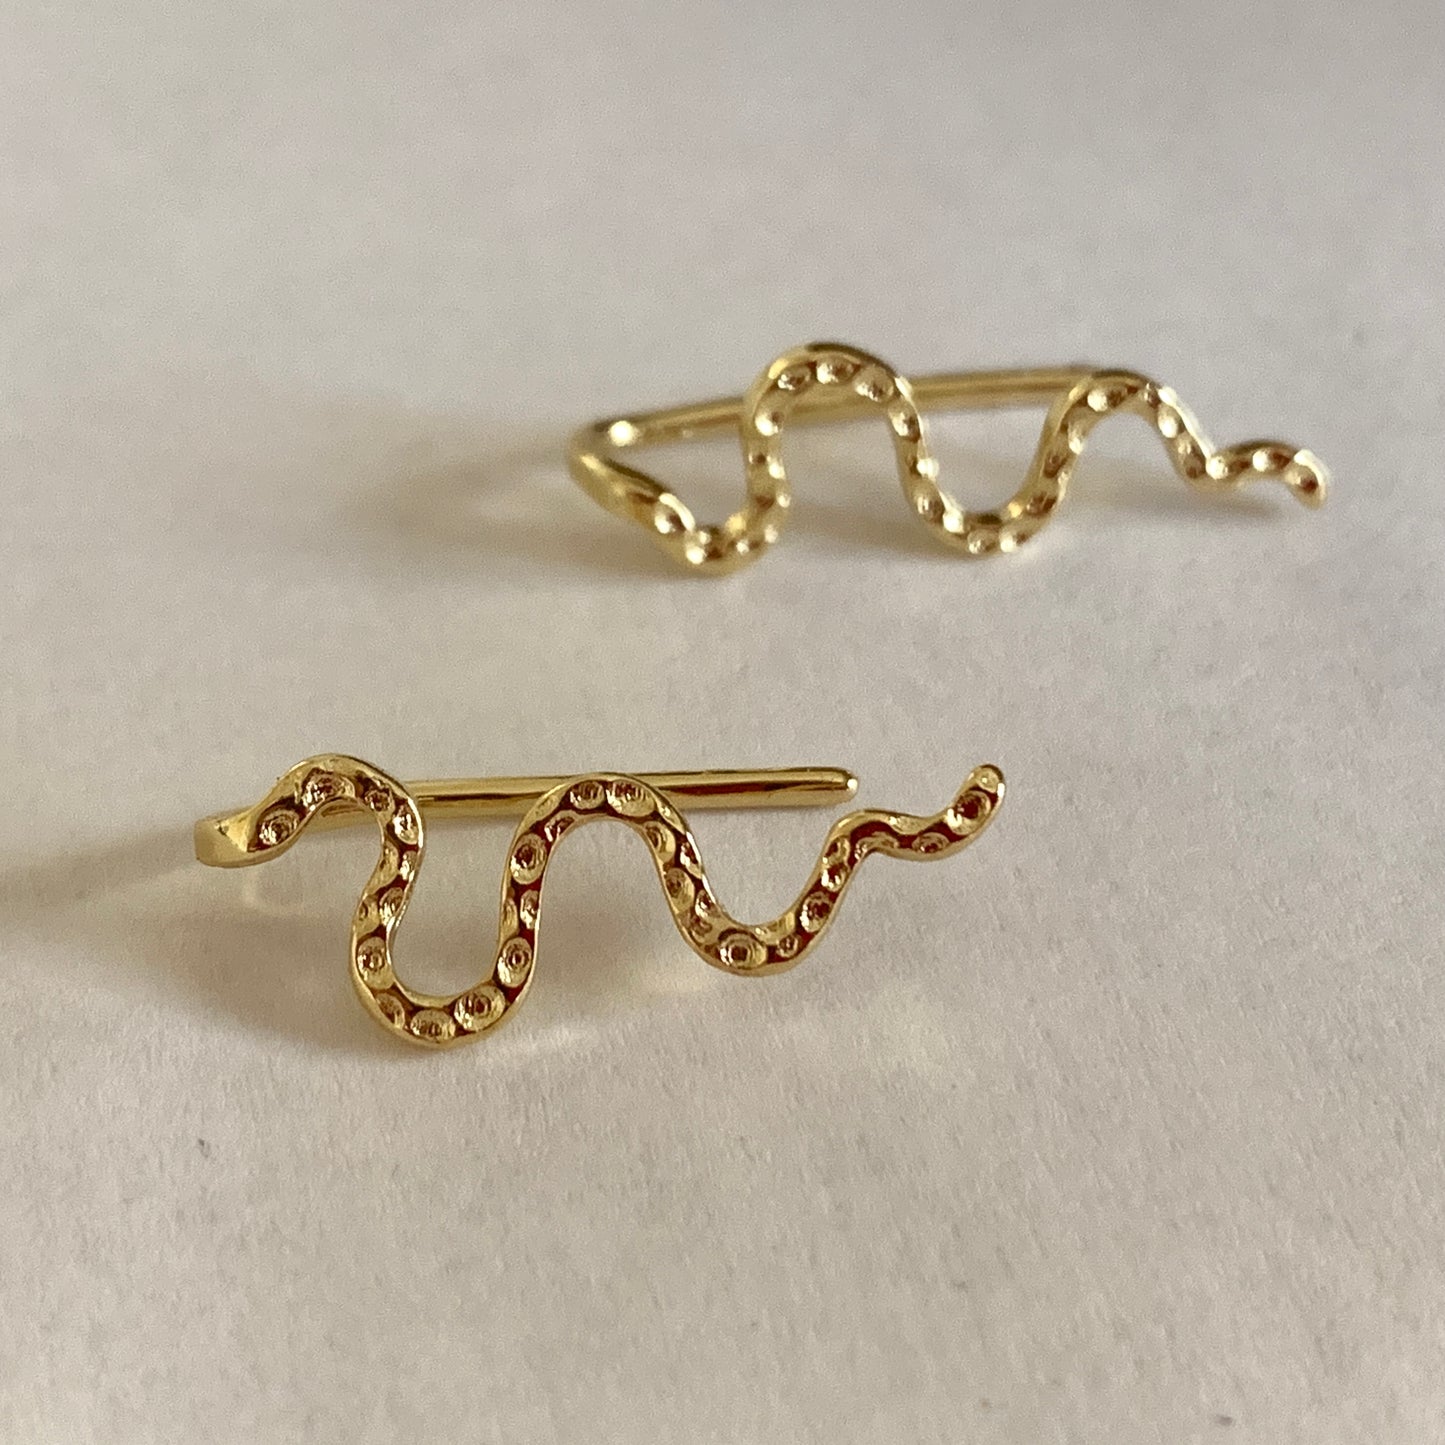 Snake Totem Earrings, Sterling Silver with 14K Gold Plating